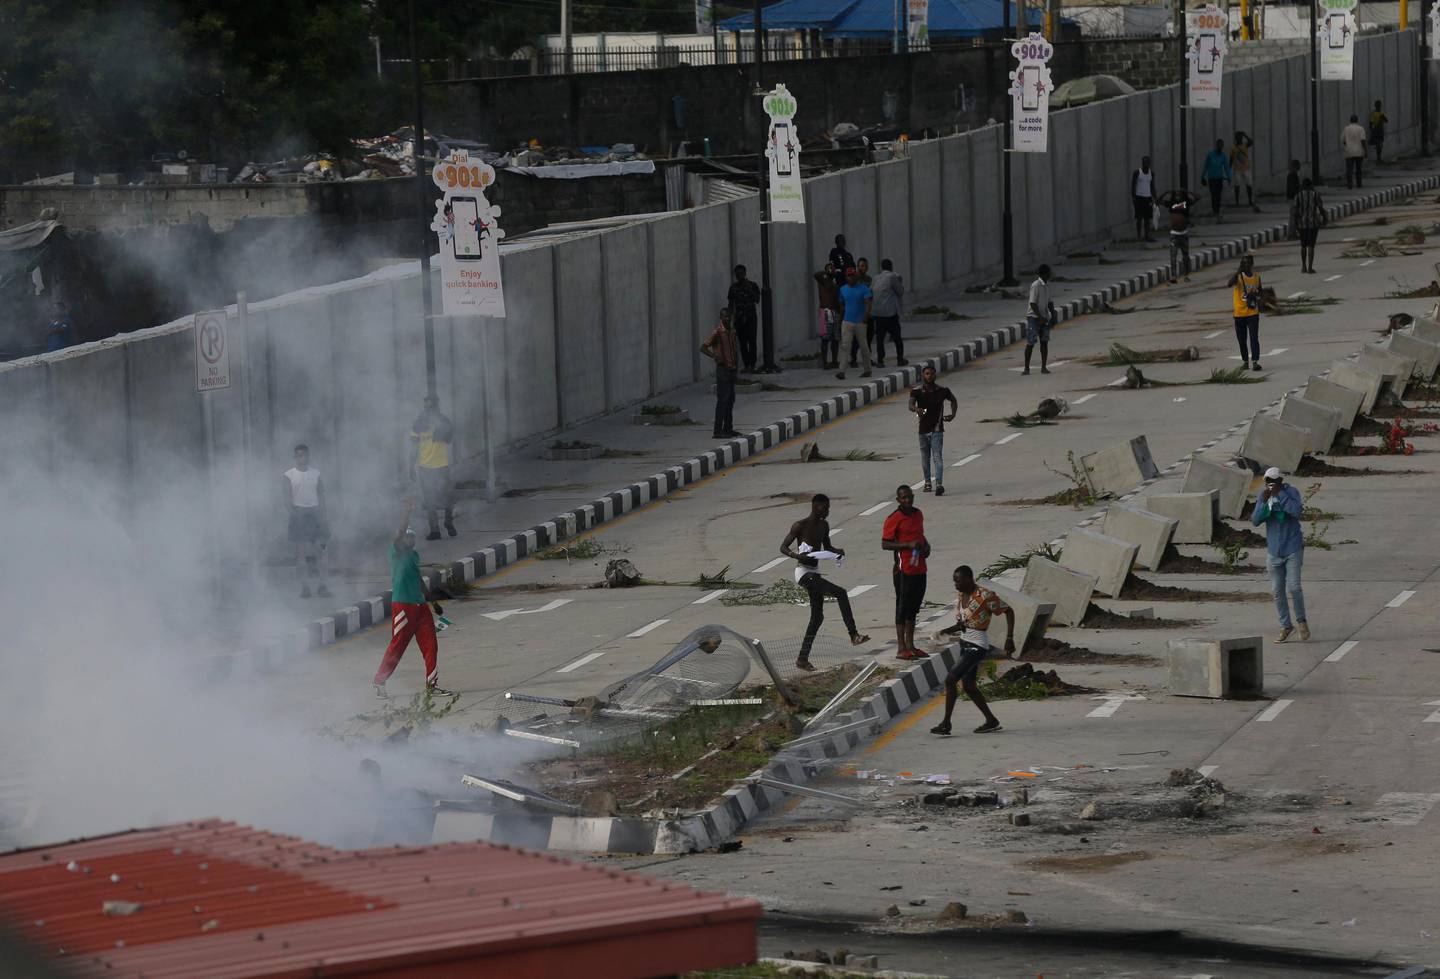 Protesters run away as police officers use teargas to disperse people demonstrating against police brutality in Lagos, Nigeria, Wednesday Oct. 21, 2020. After 13 days of protests against alleged police brutality, authorities have imposed a 24-hour curfew in Lagos, Nigeria's largest city, as moves are made to stop growing violence. ( AP Photo/Sunday Alamba)